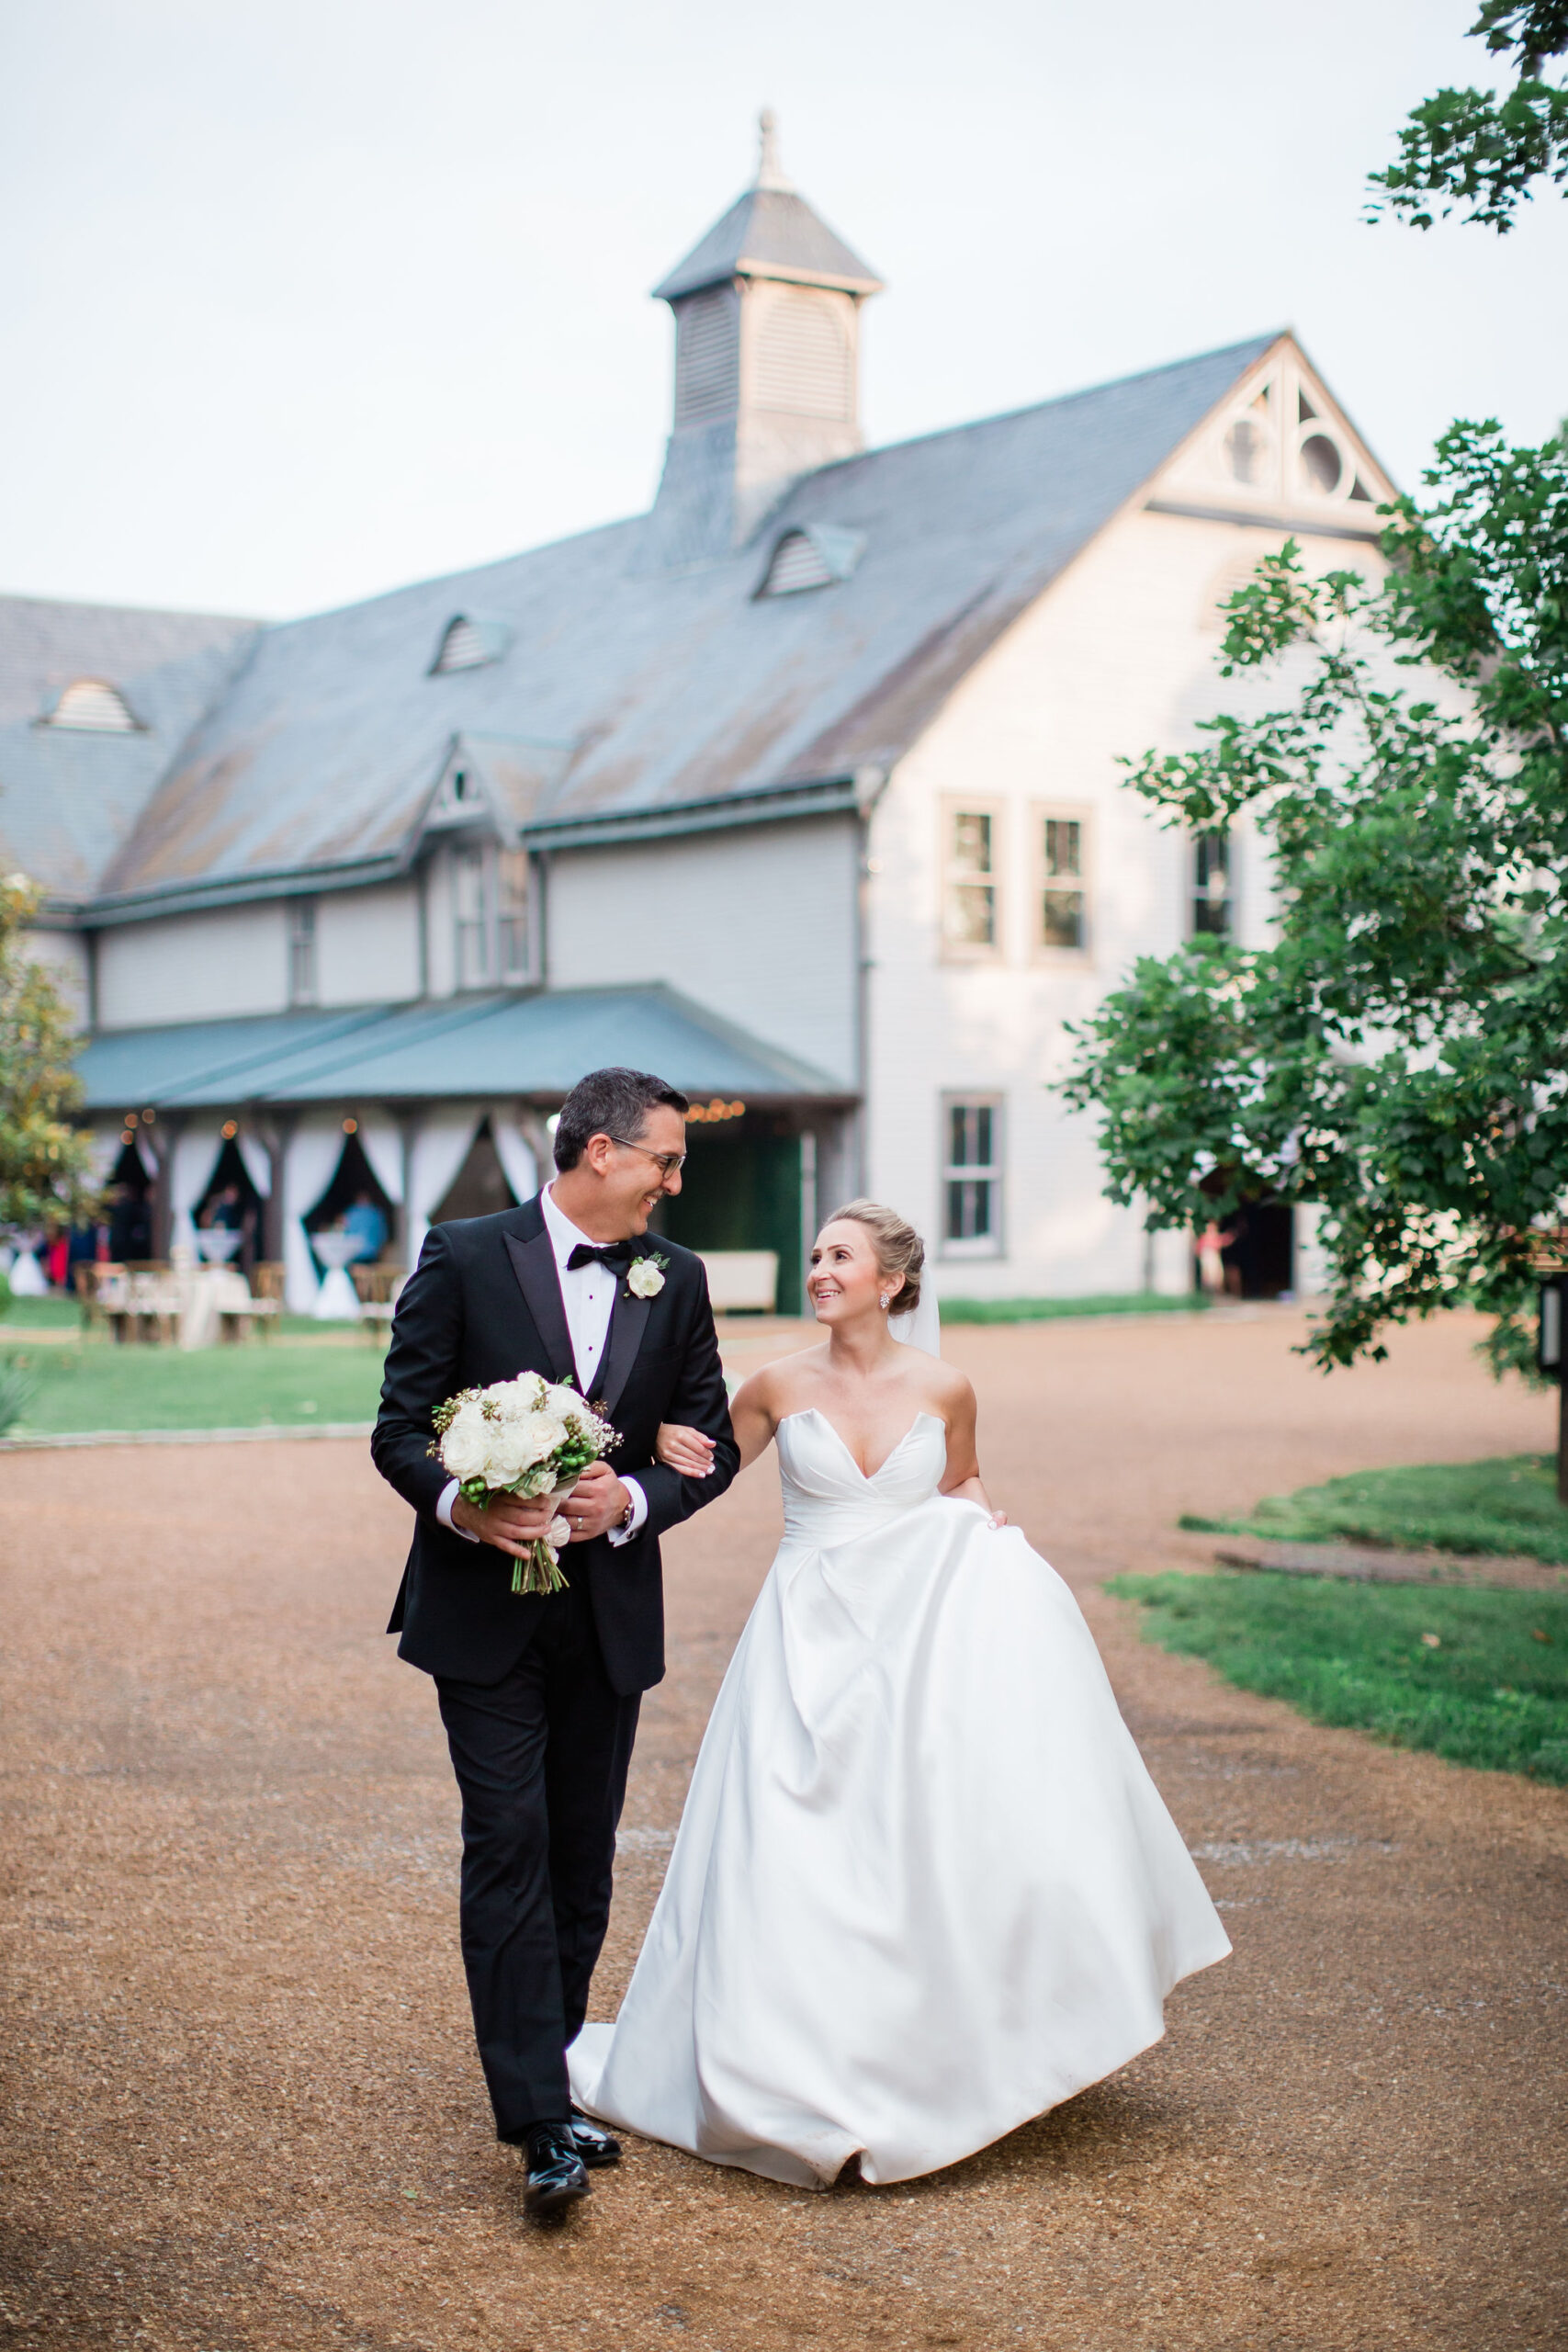 Luxury wedding at Belle Meade Historic Site